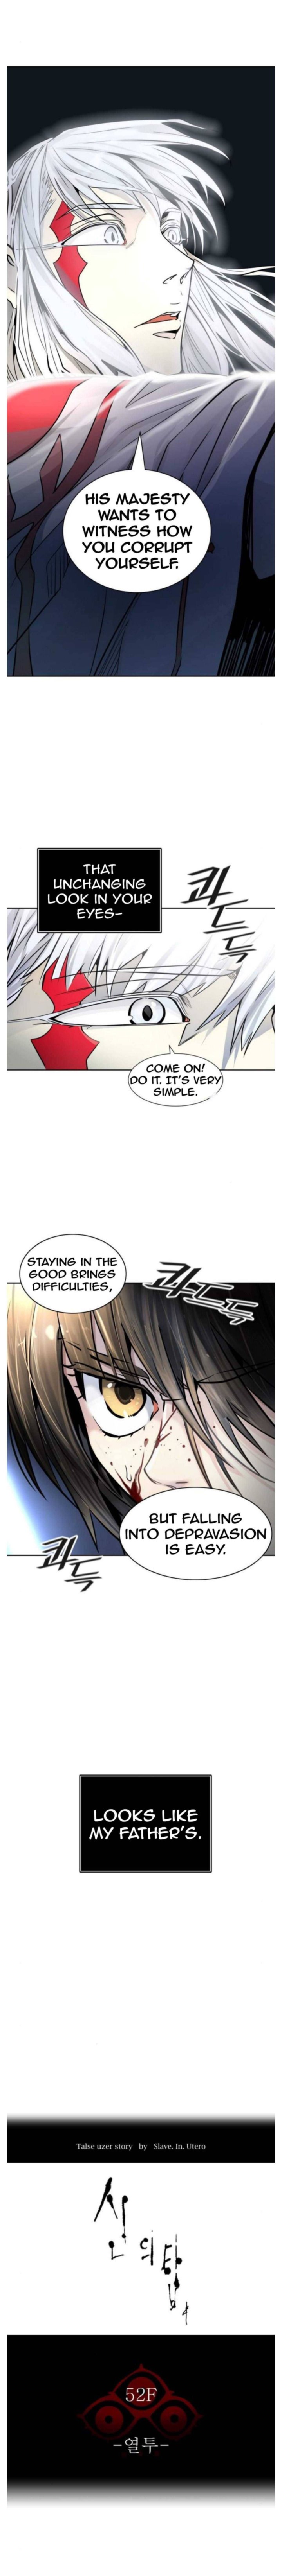 Tower Of God Chapter 498 Page 3